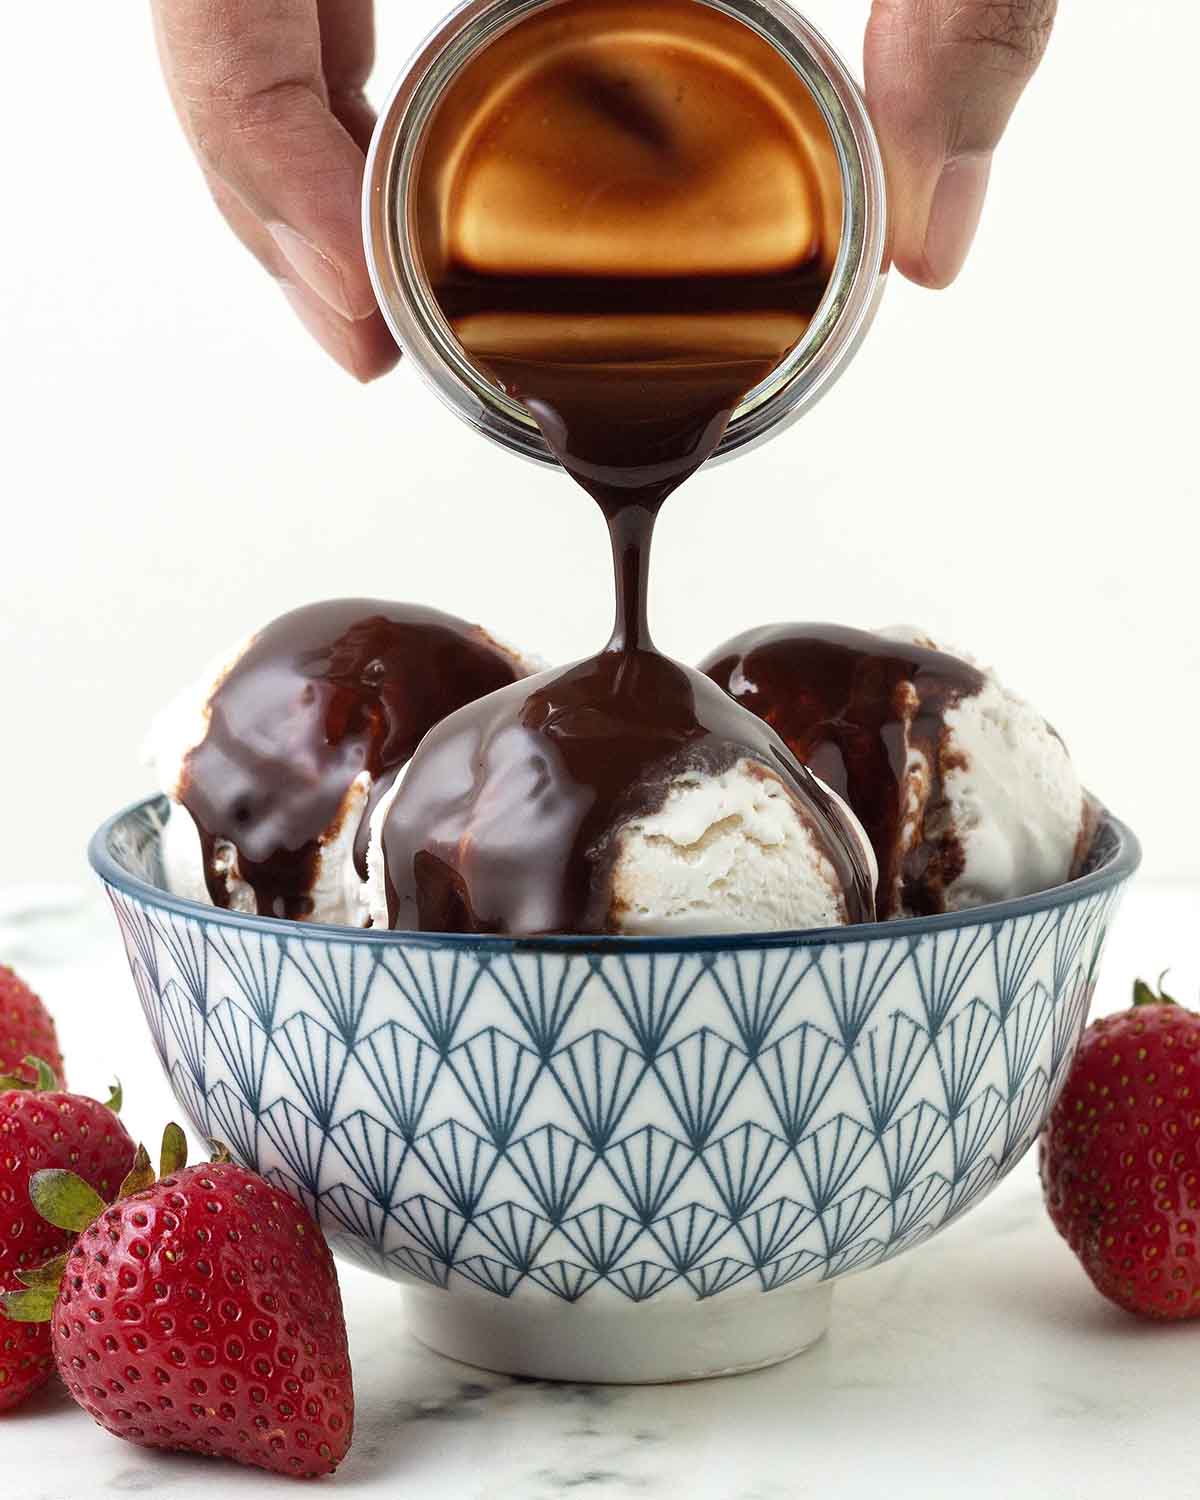 A hand pouring chocolate syrup from a small glass jar onto ice cream in a blue bowl.